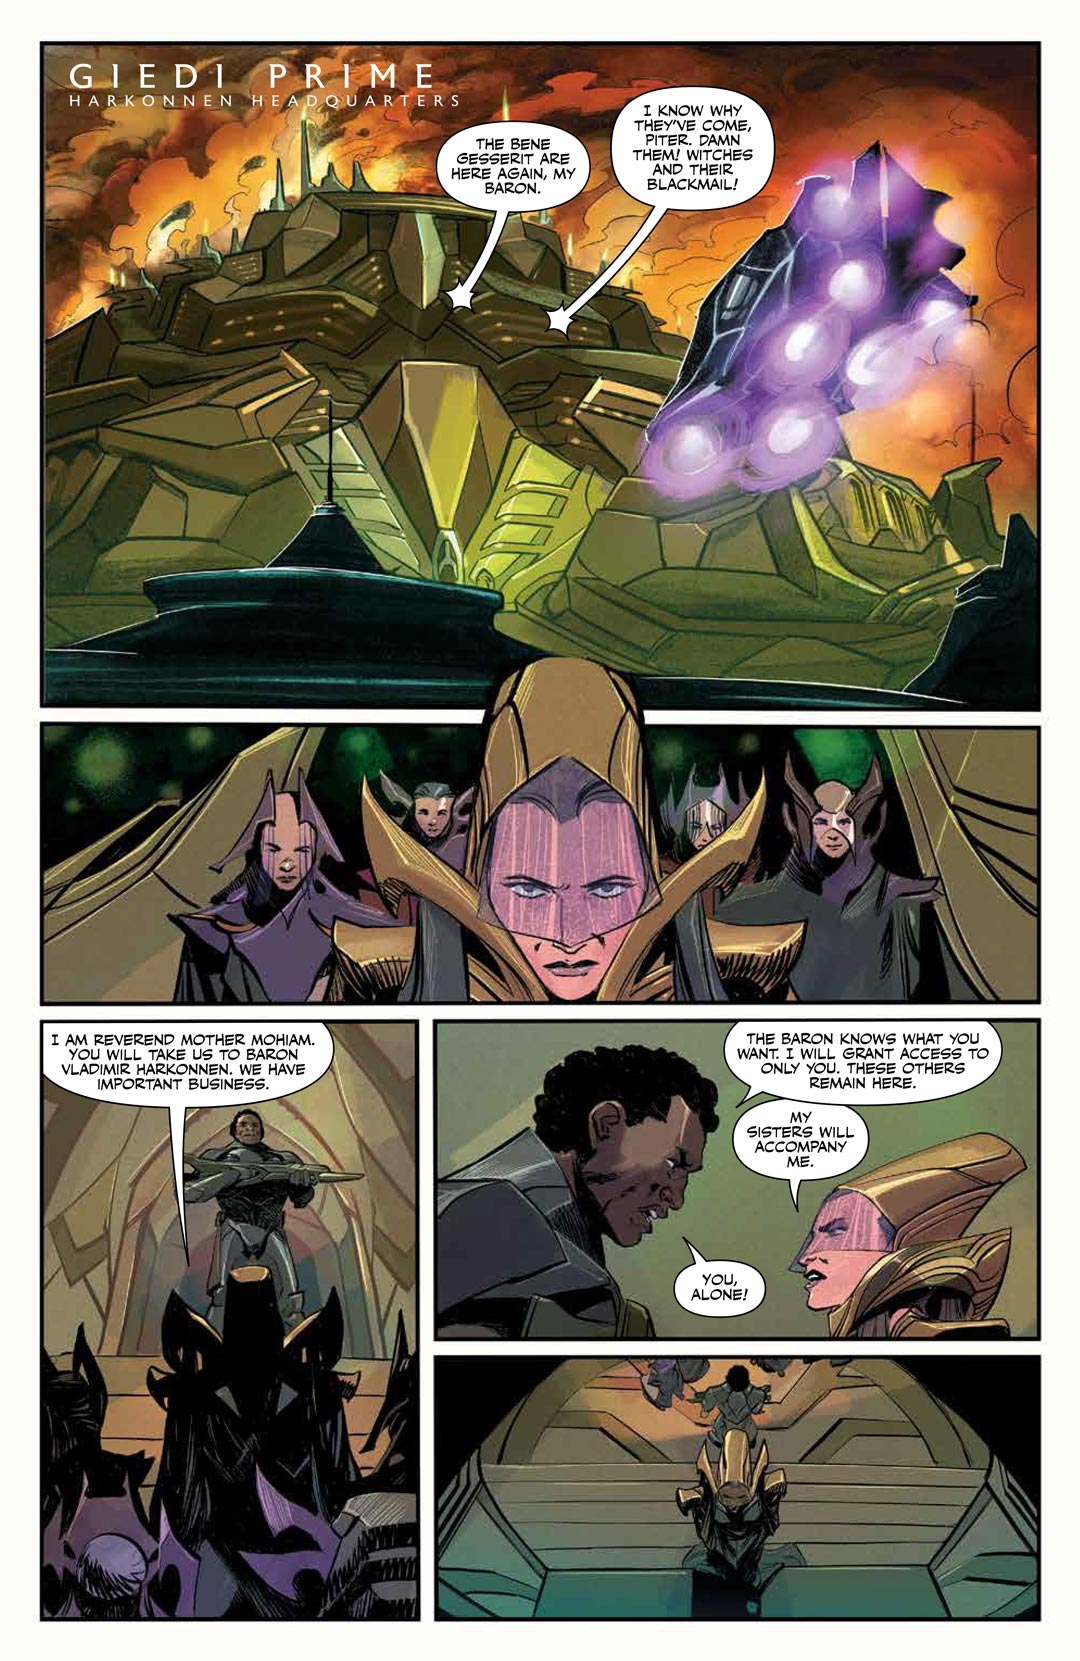 Dune: House Atreides comic series. Issue #7, preview page 4.